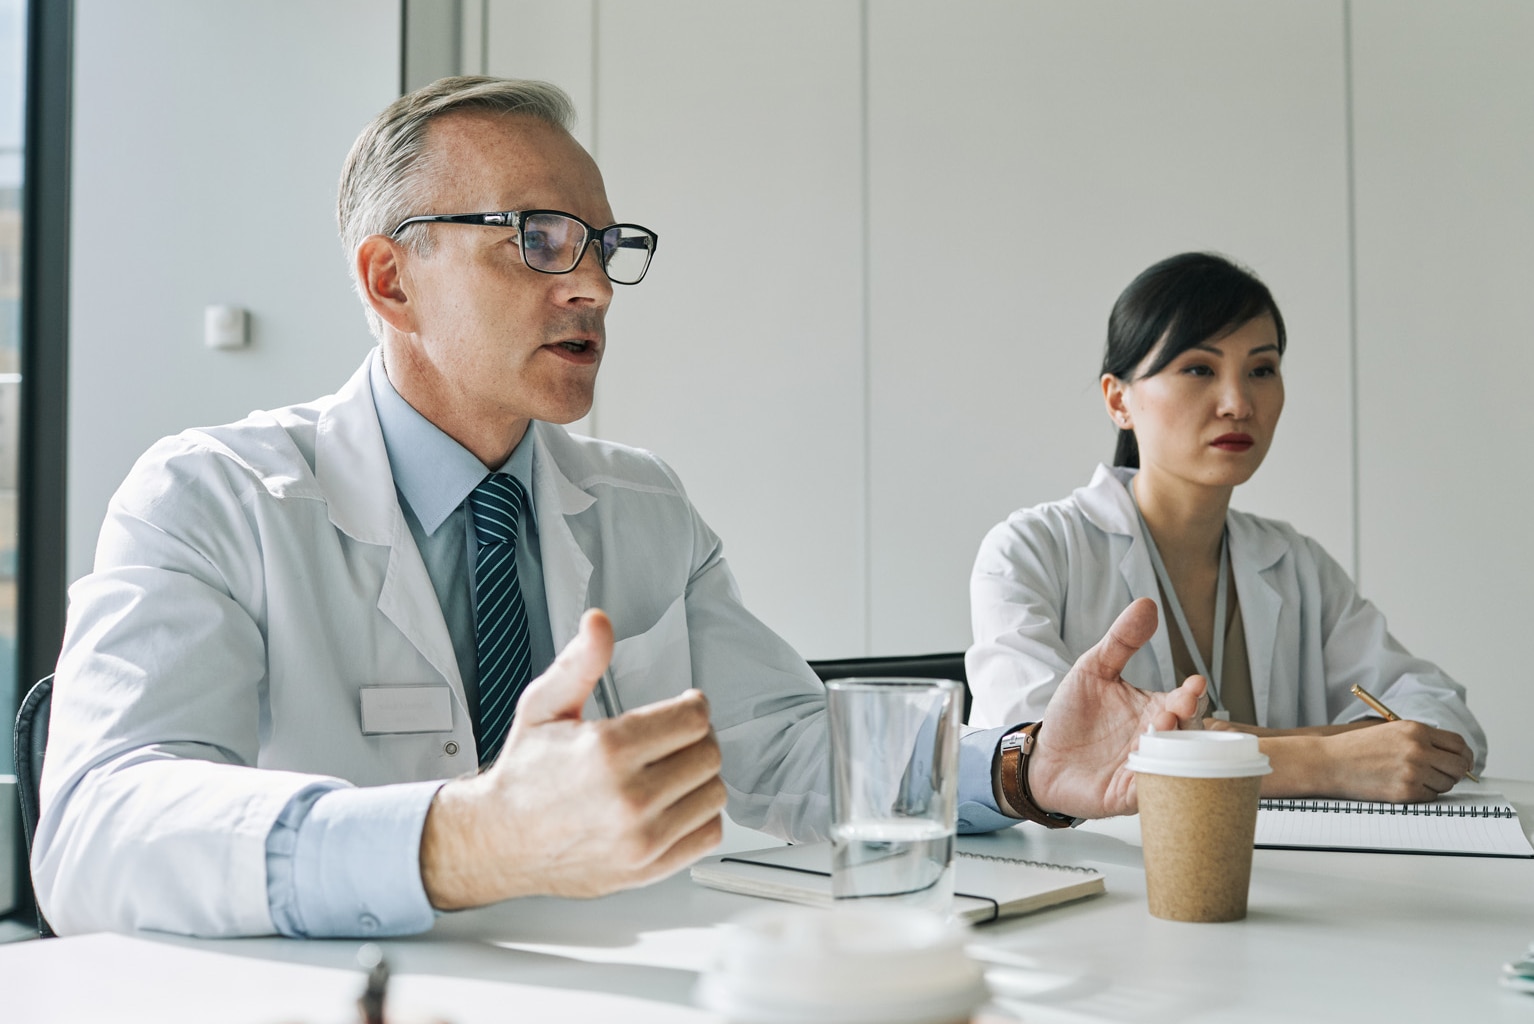 Portrait of mature doctor sitting at meeting table in conference room while speaking during medical seminar